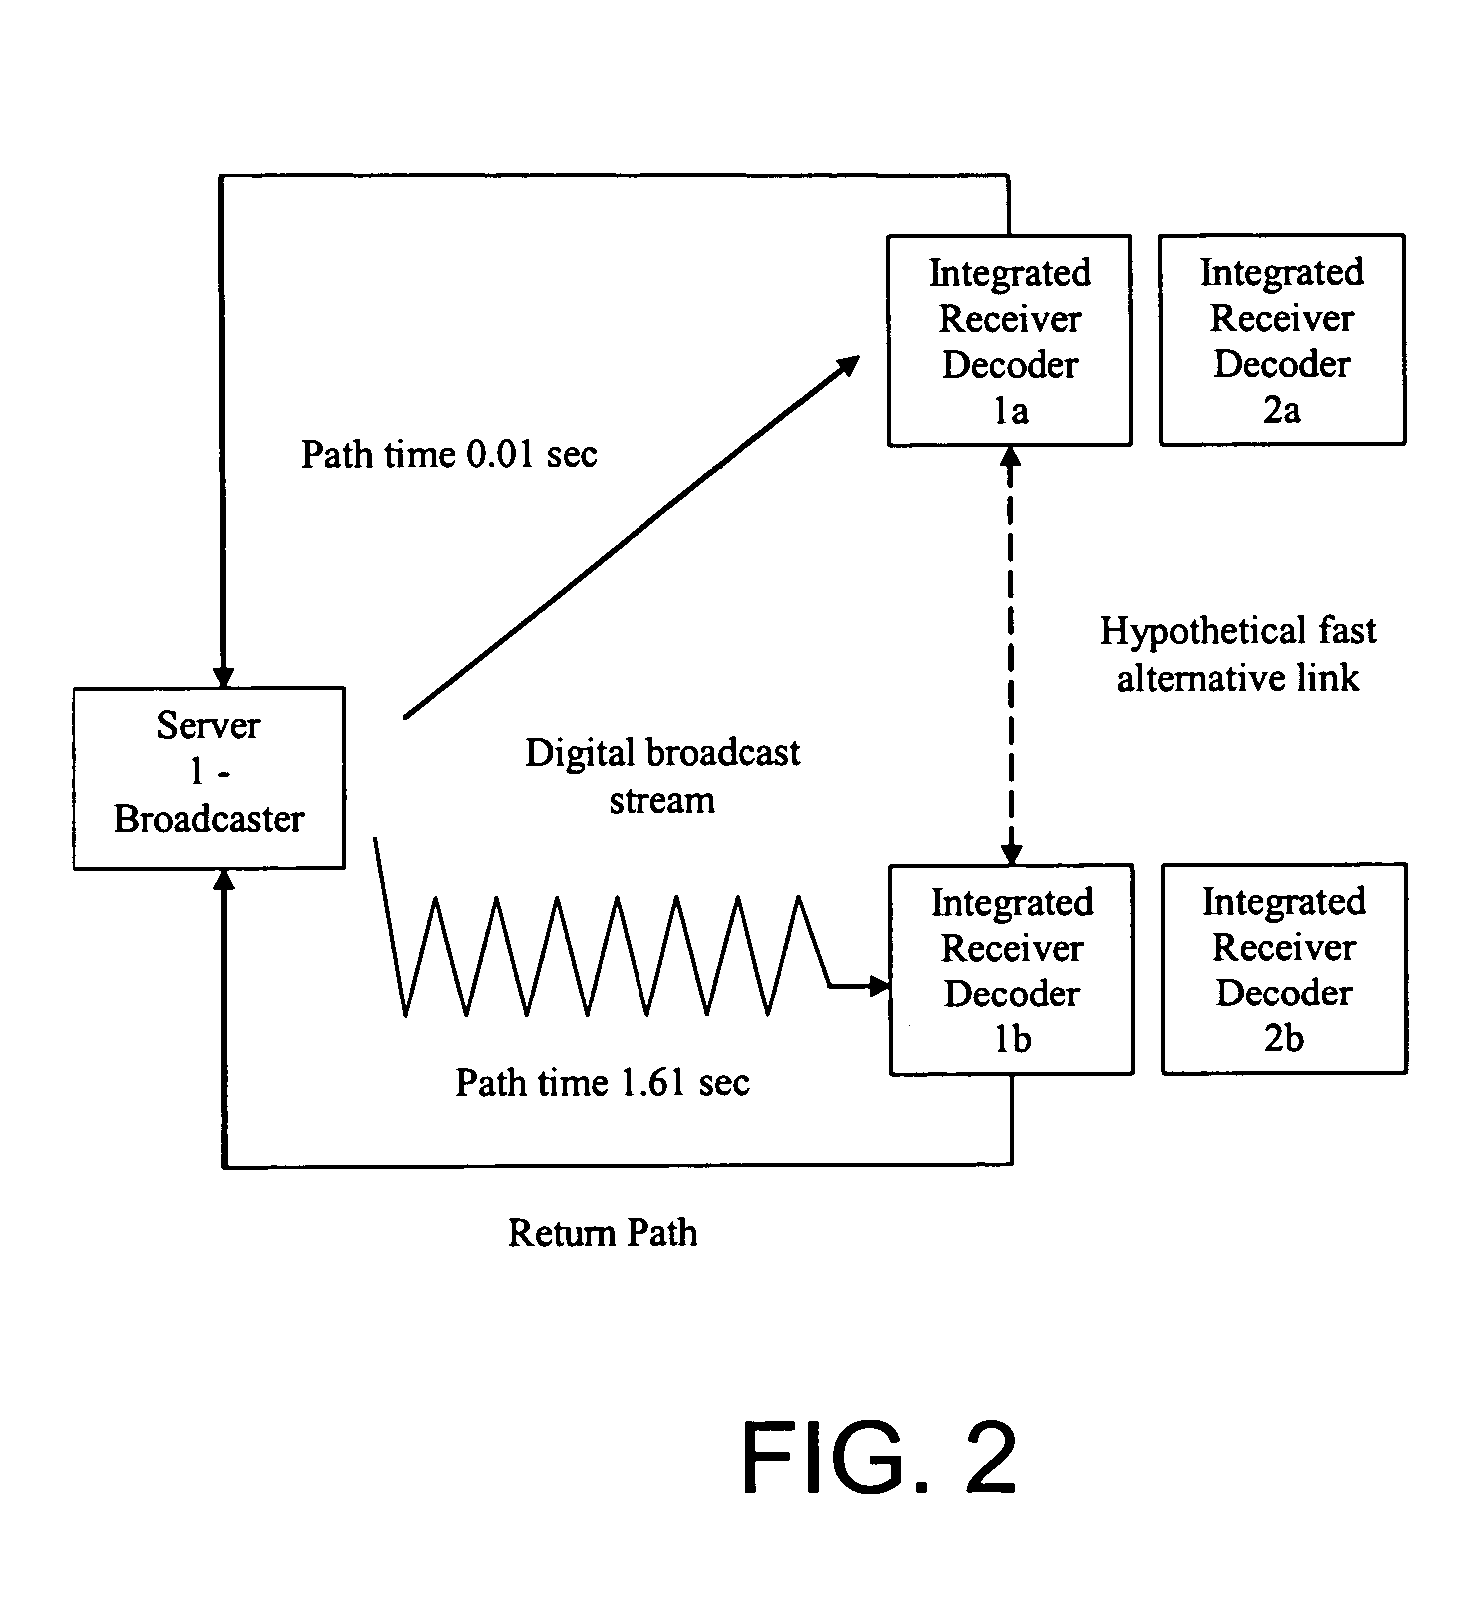 System and methods for synchronizing the operation of multiple remote receivers in a broadcast environment